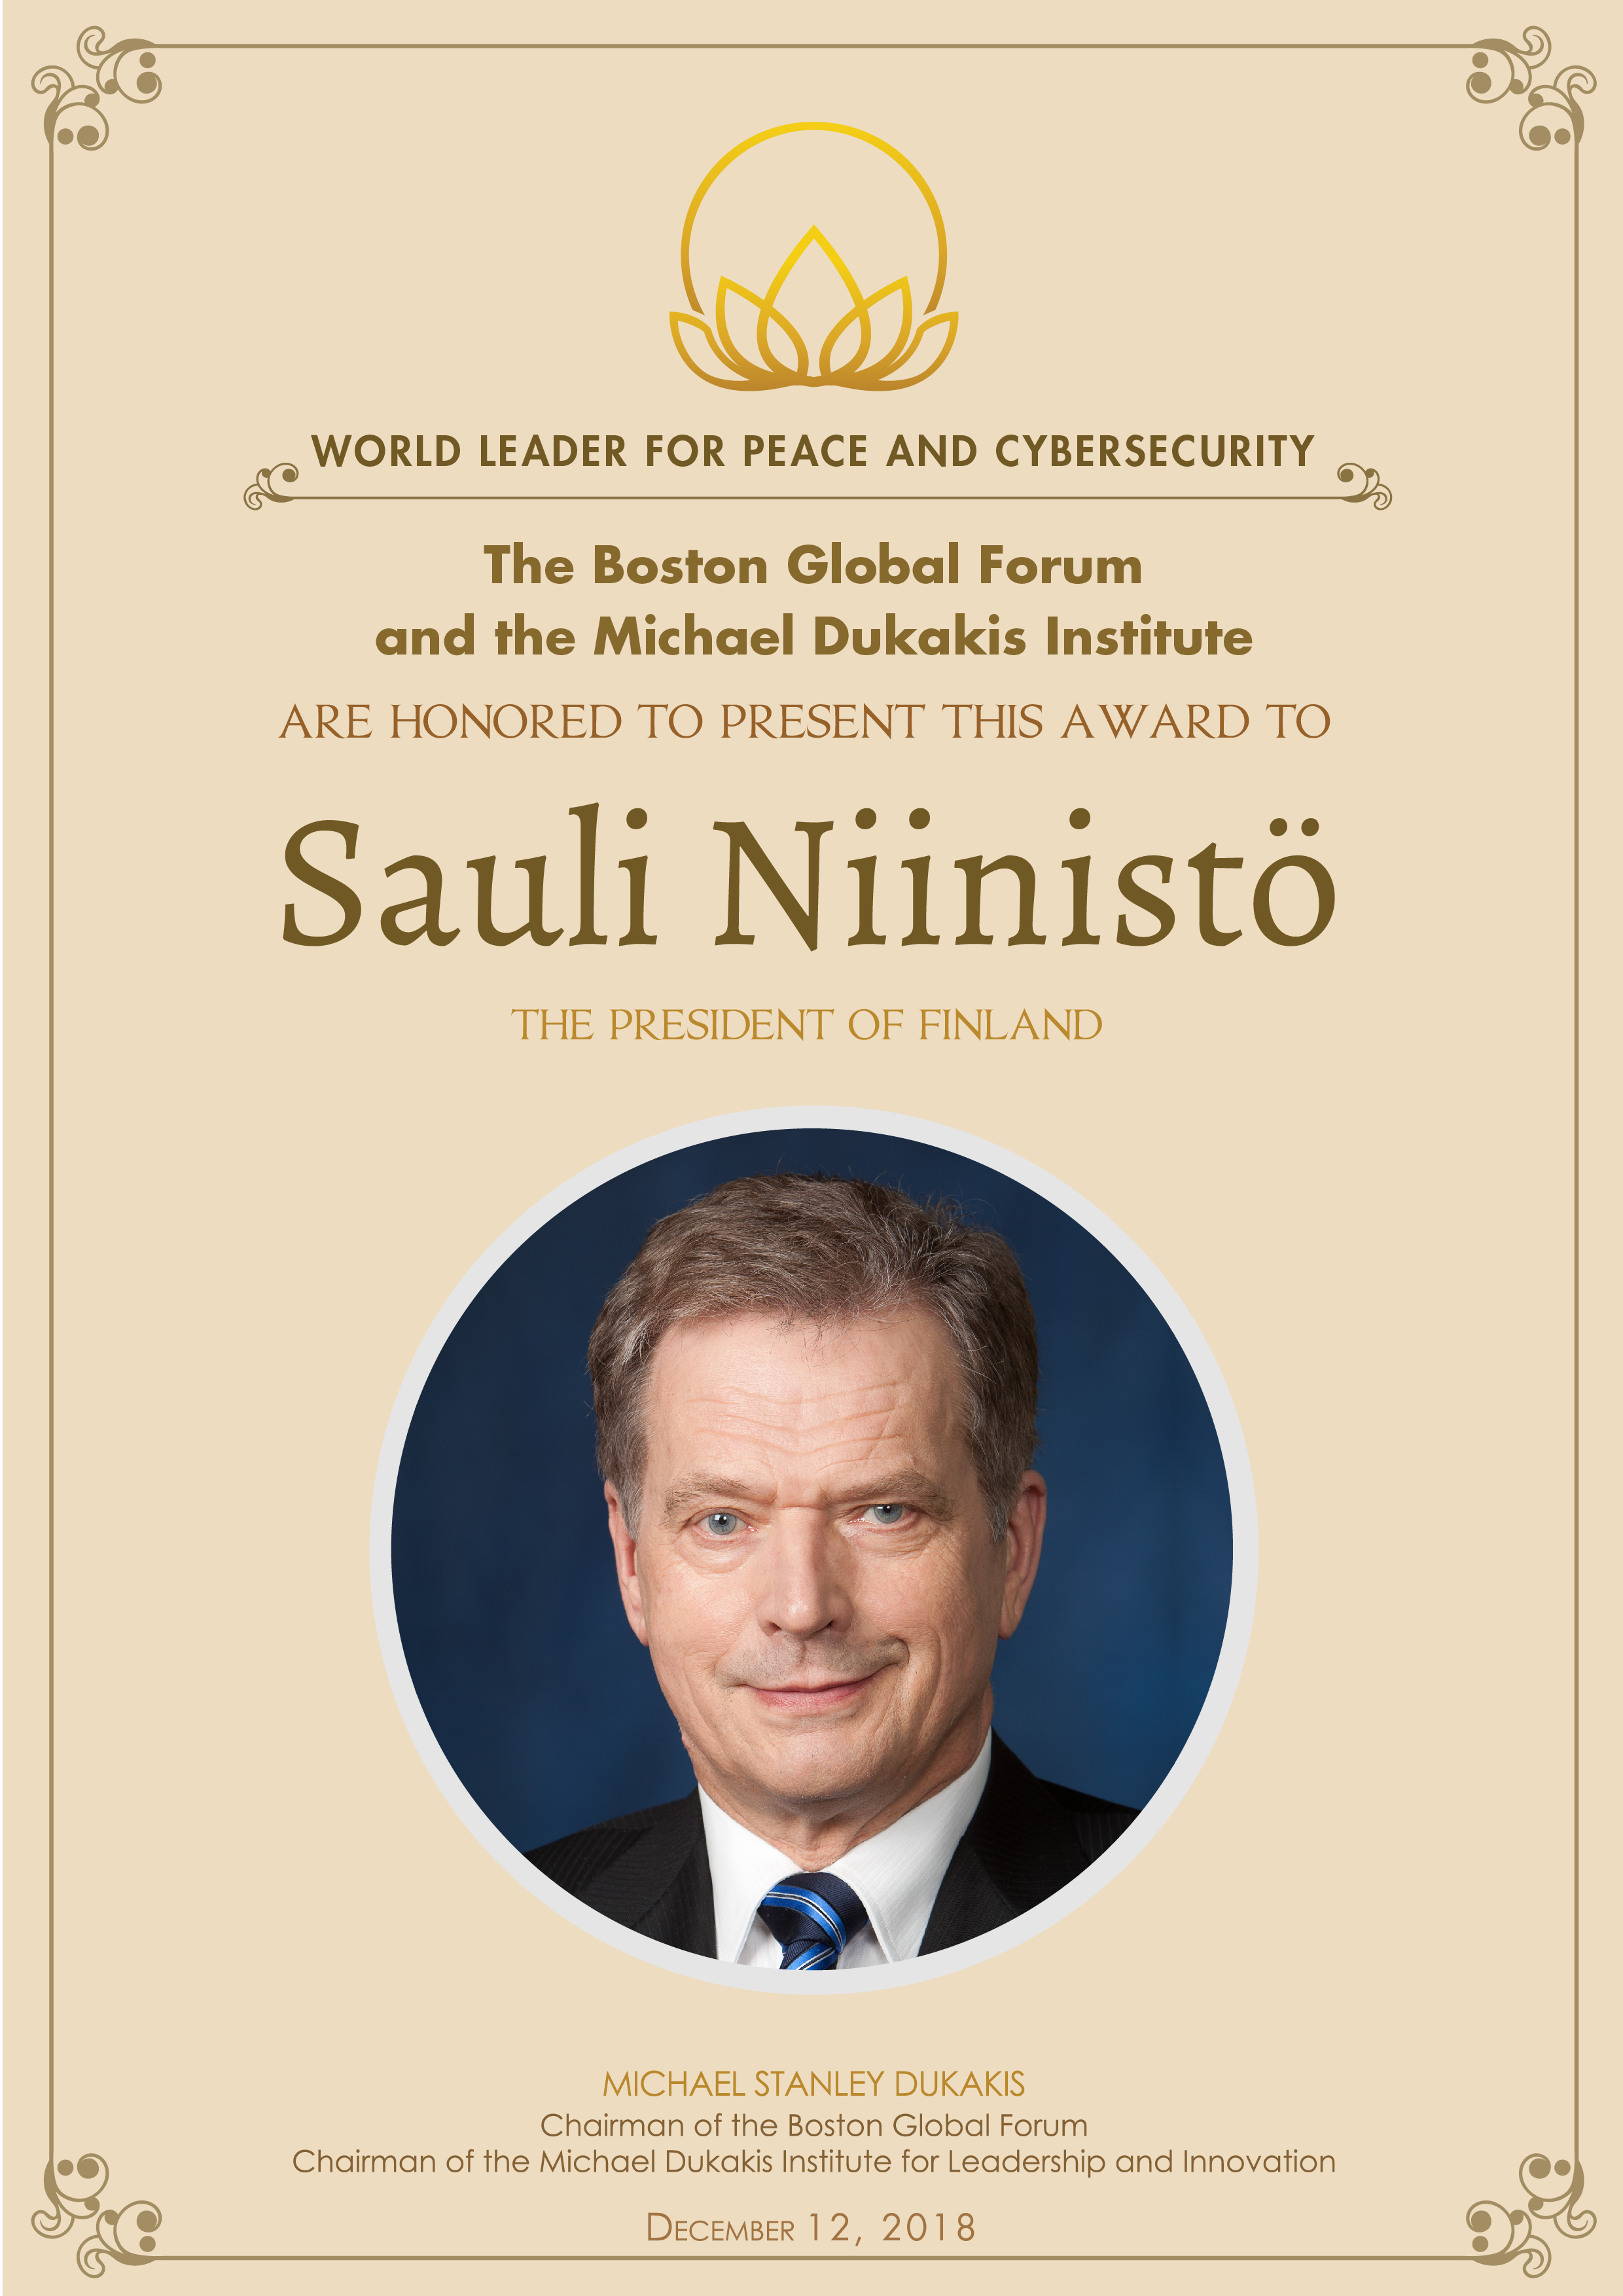 President of Finland Sauli Niinisto: “Respect for universal human rights is the key to a peaceful and just world.”